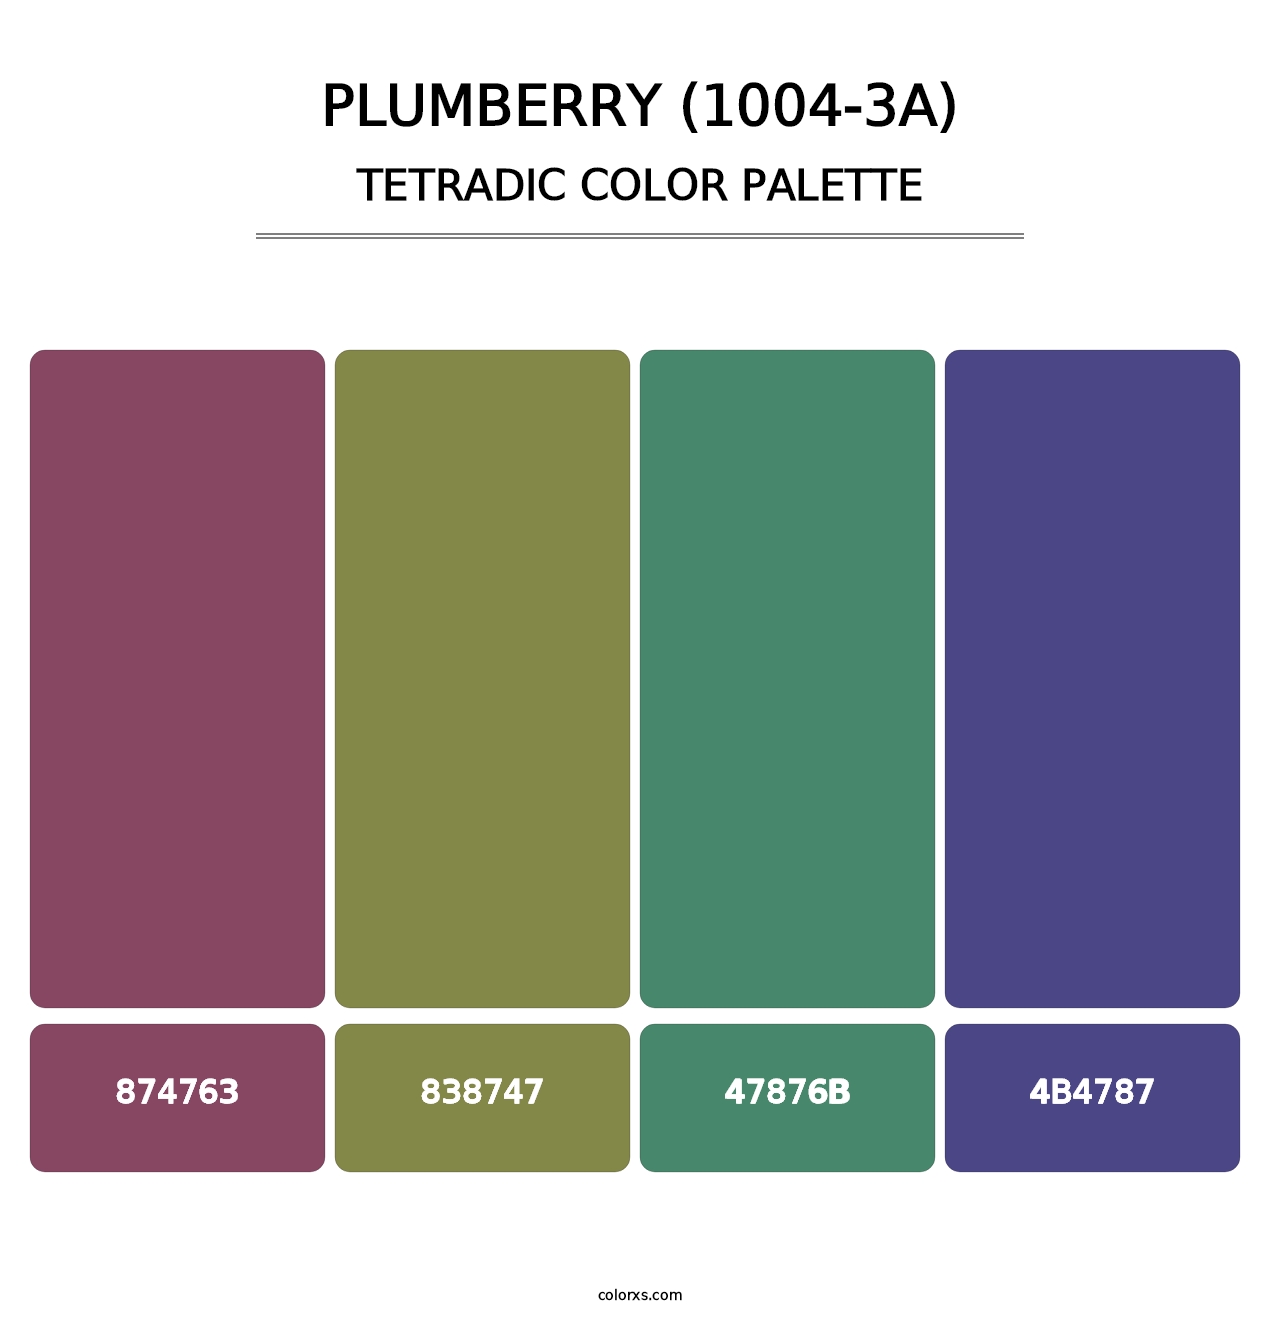 Plumberry (1004-3A) - Tetradic Color Palette